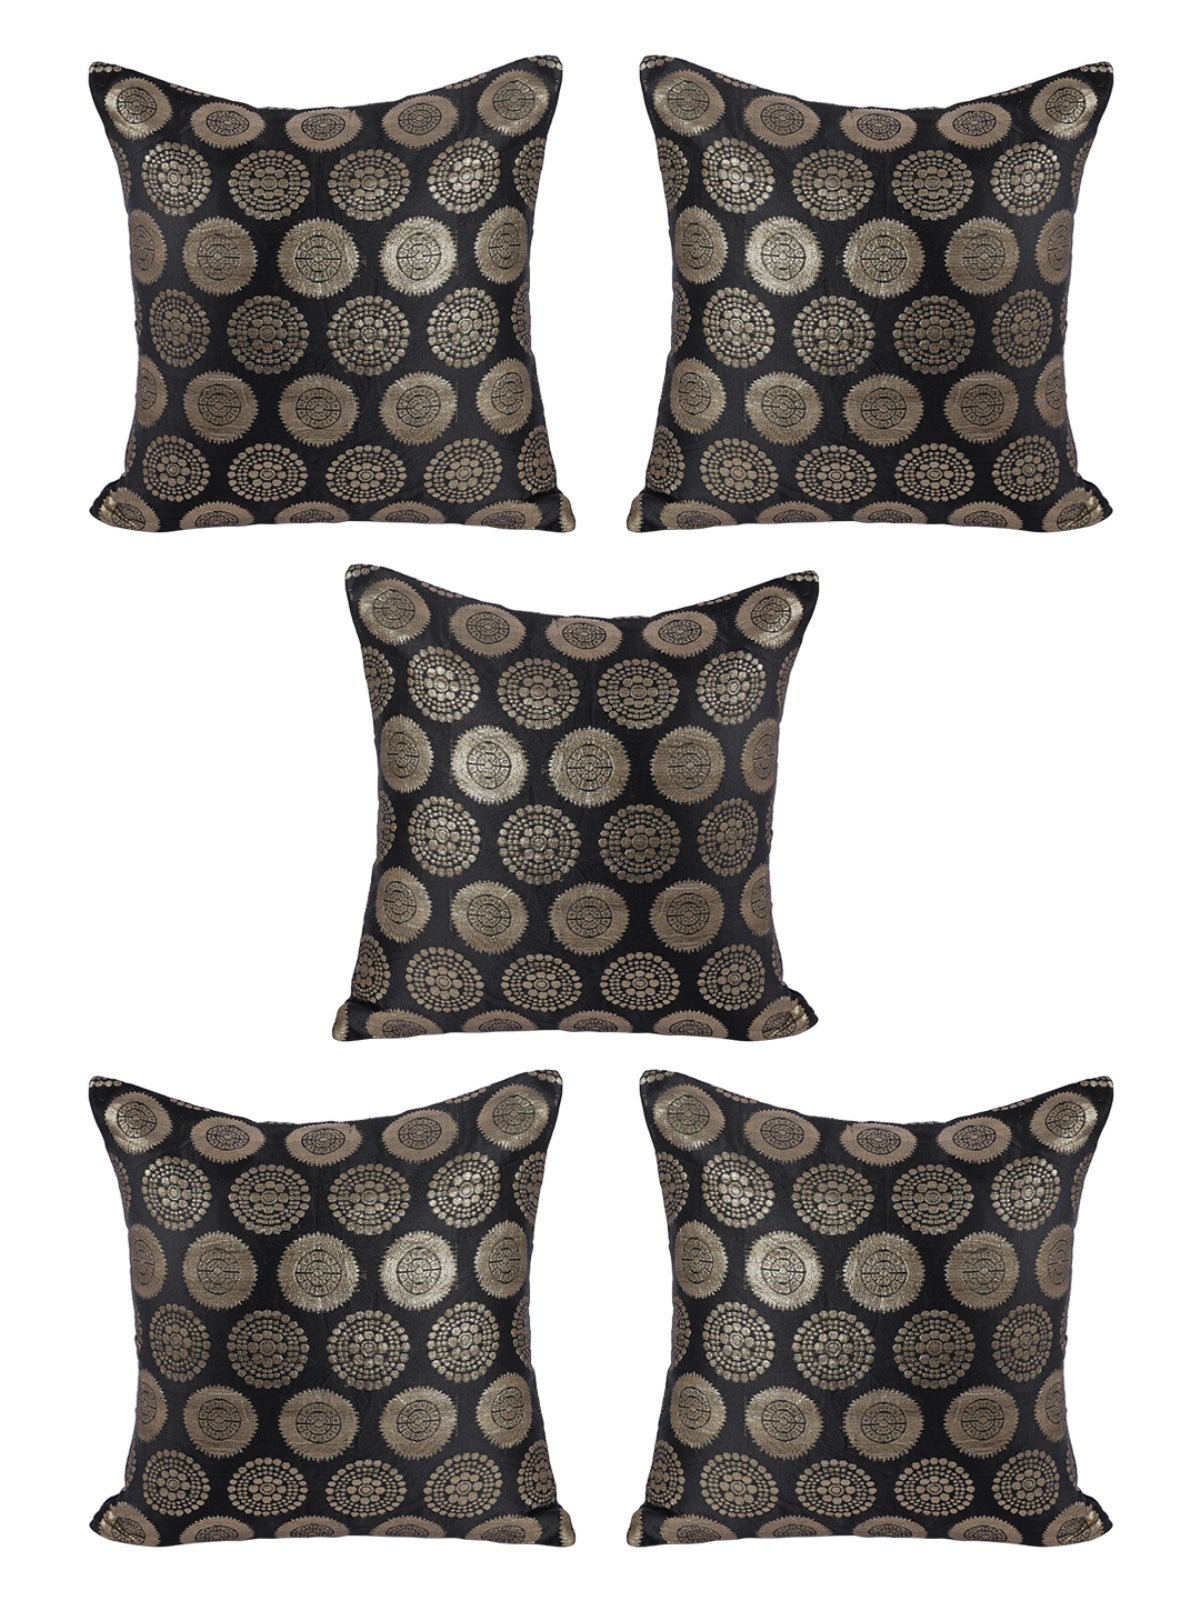 Black & Gold Set of 5 Polyester 16 Inch x 16 Inch Cushion Covers